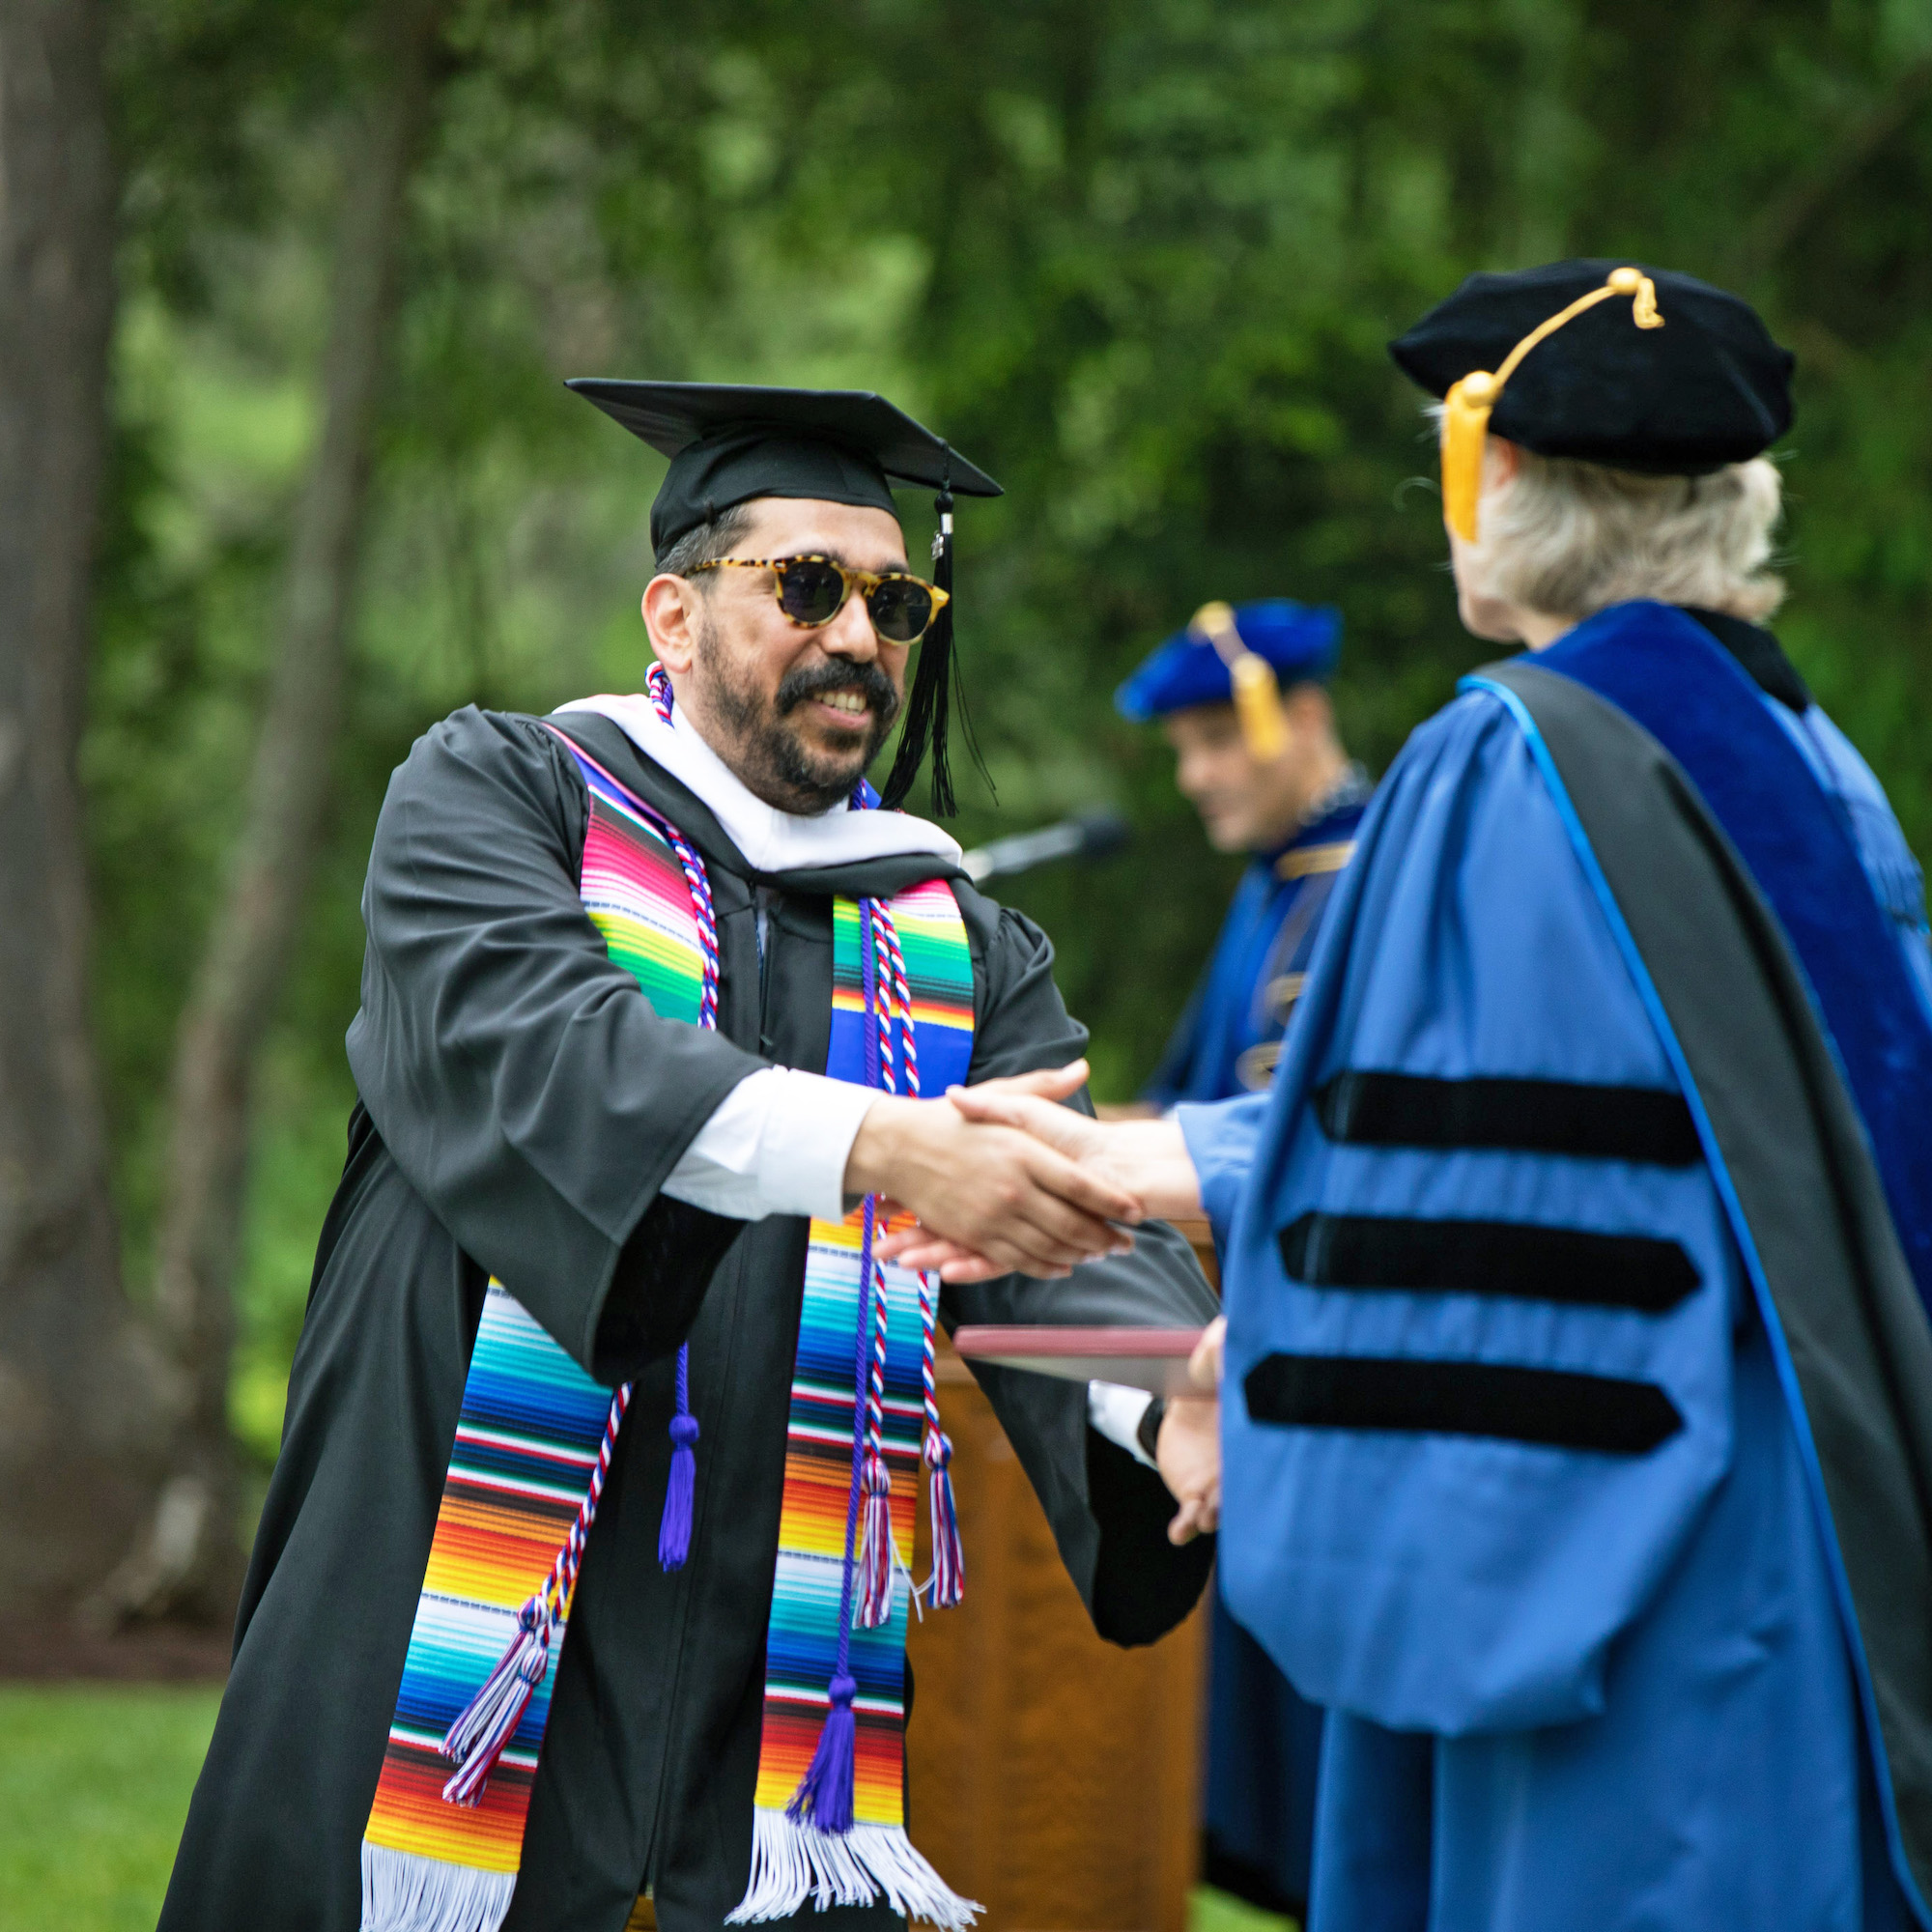 A graduate with sunglasses and dark facial hair wears a black robe with a bright, multicolored scarf, and shakes hand with President Bradley, who is wearing a blue robe and a black cap.